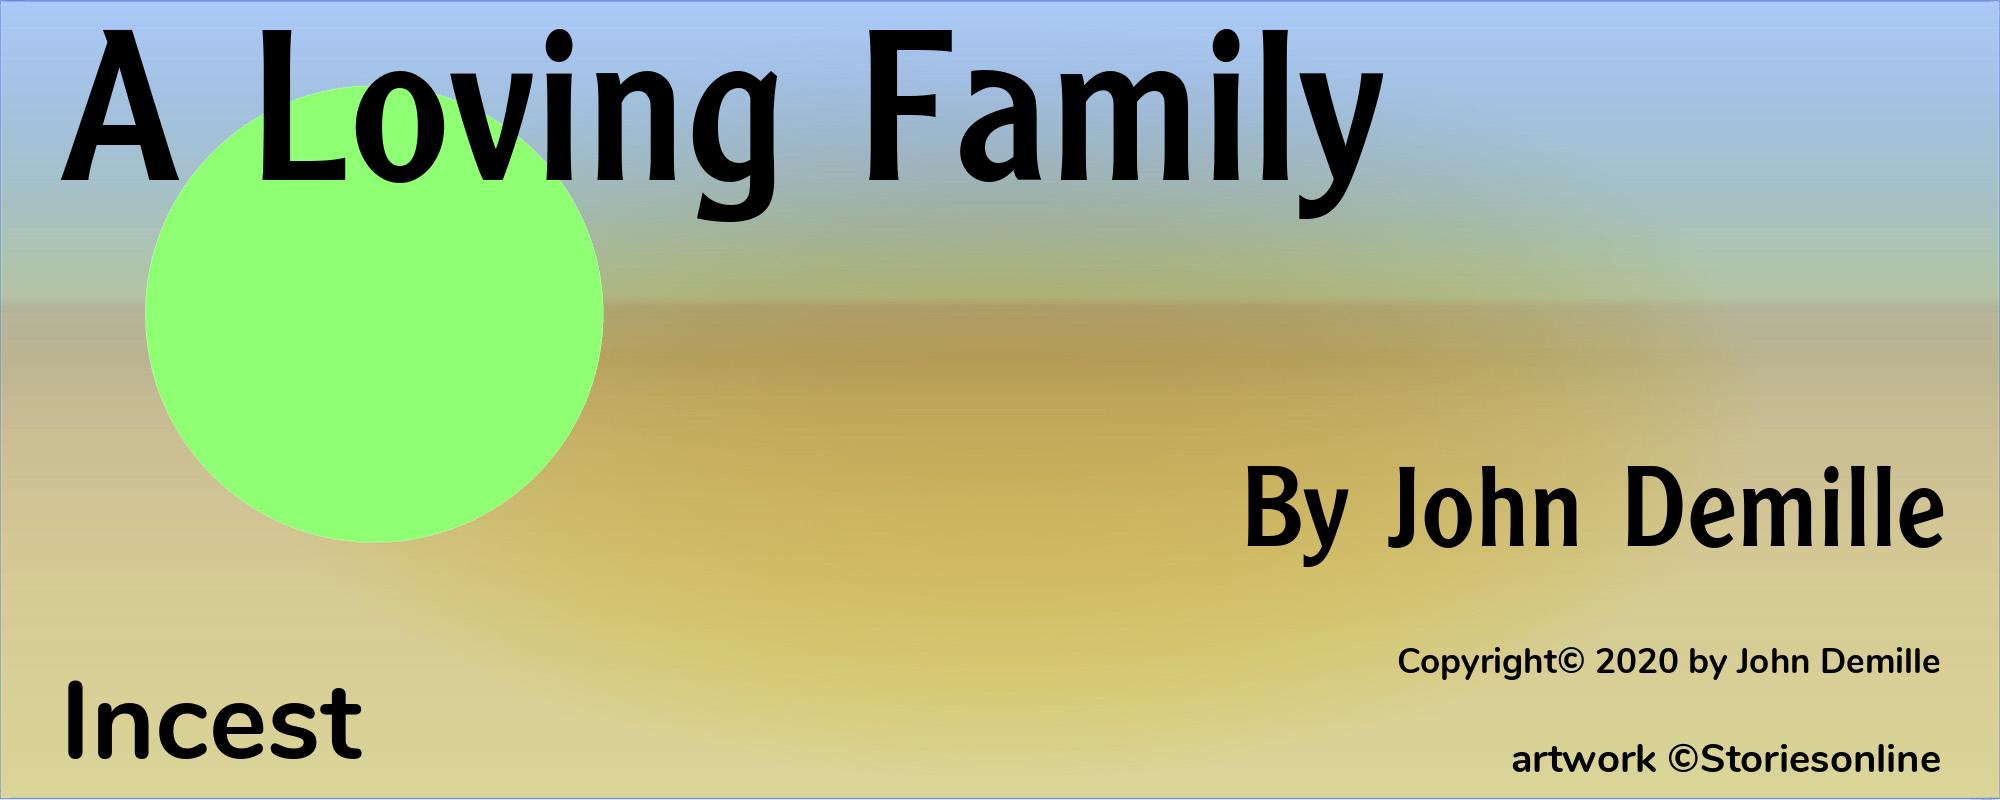 A Loving Family - Cover